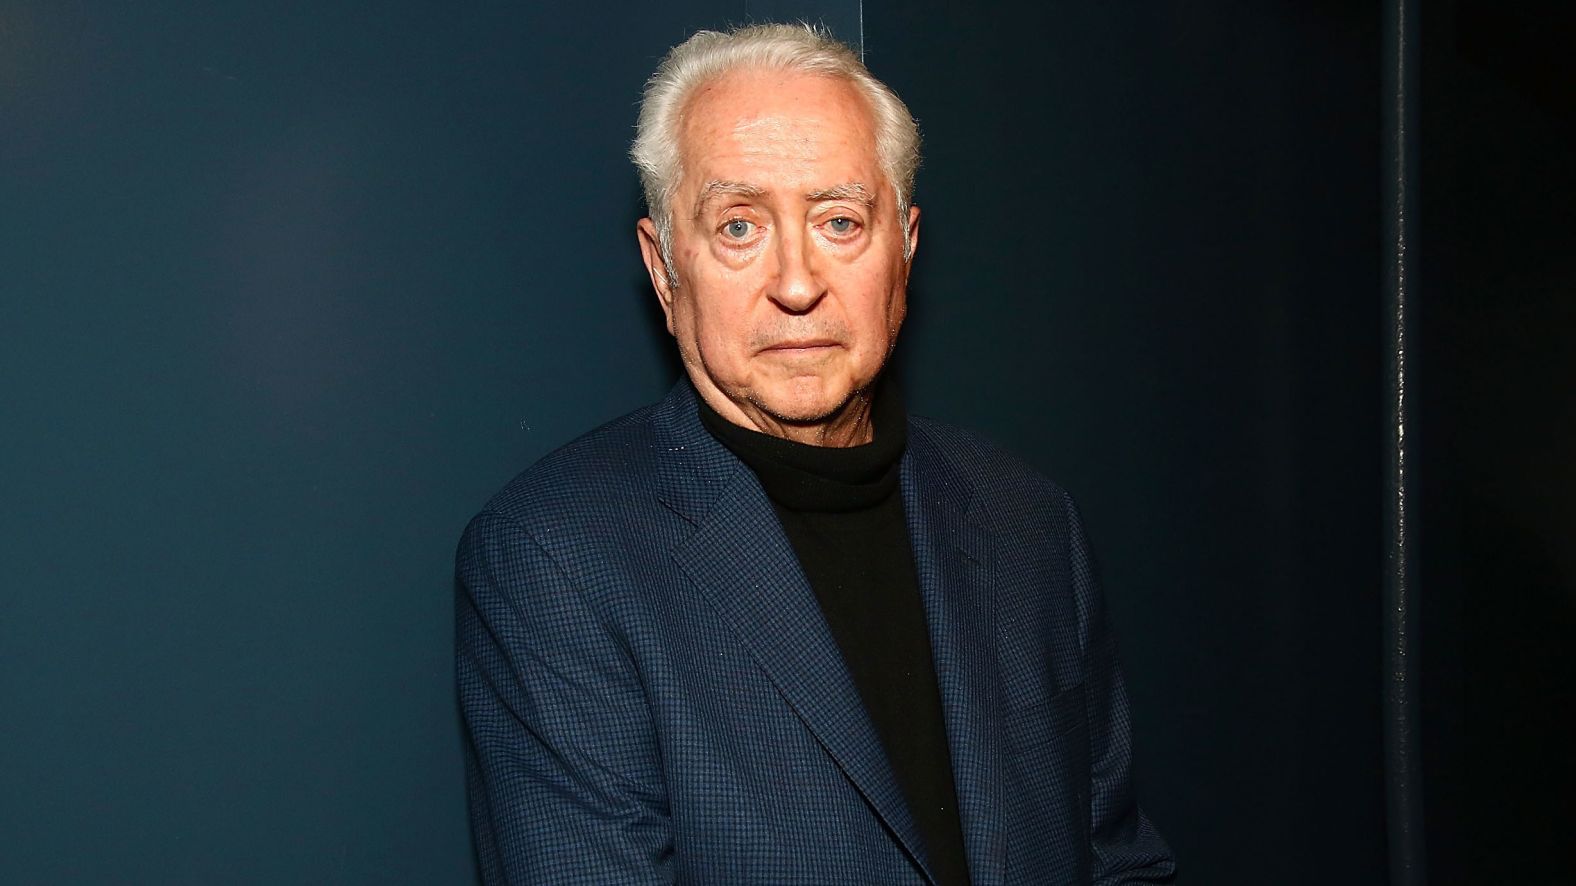 Actor and filmmaker <a href="https://www.cnn.com/2021/07/07/entertainment/robert-downey-sr-obit/index.html" target="_blank">Robert Downey Sr.</a> died July 7 at the age of 85. He is perhaps best known for his films "Putney Swope" and "Greaser's Palace." He also appeared in "Boogie Nights," "Magnolia" and "To Live and Die in L.A."